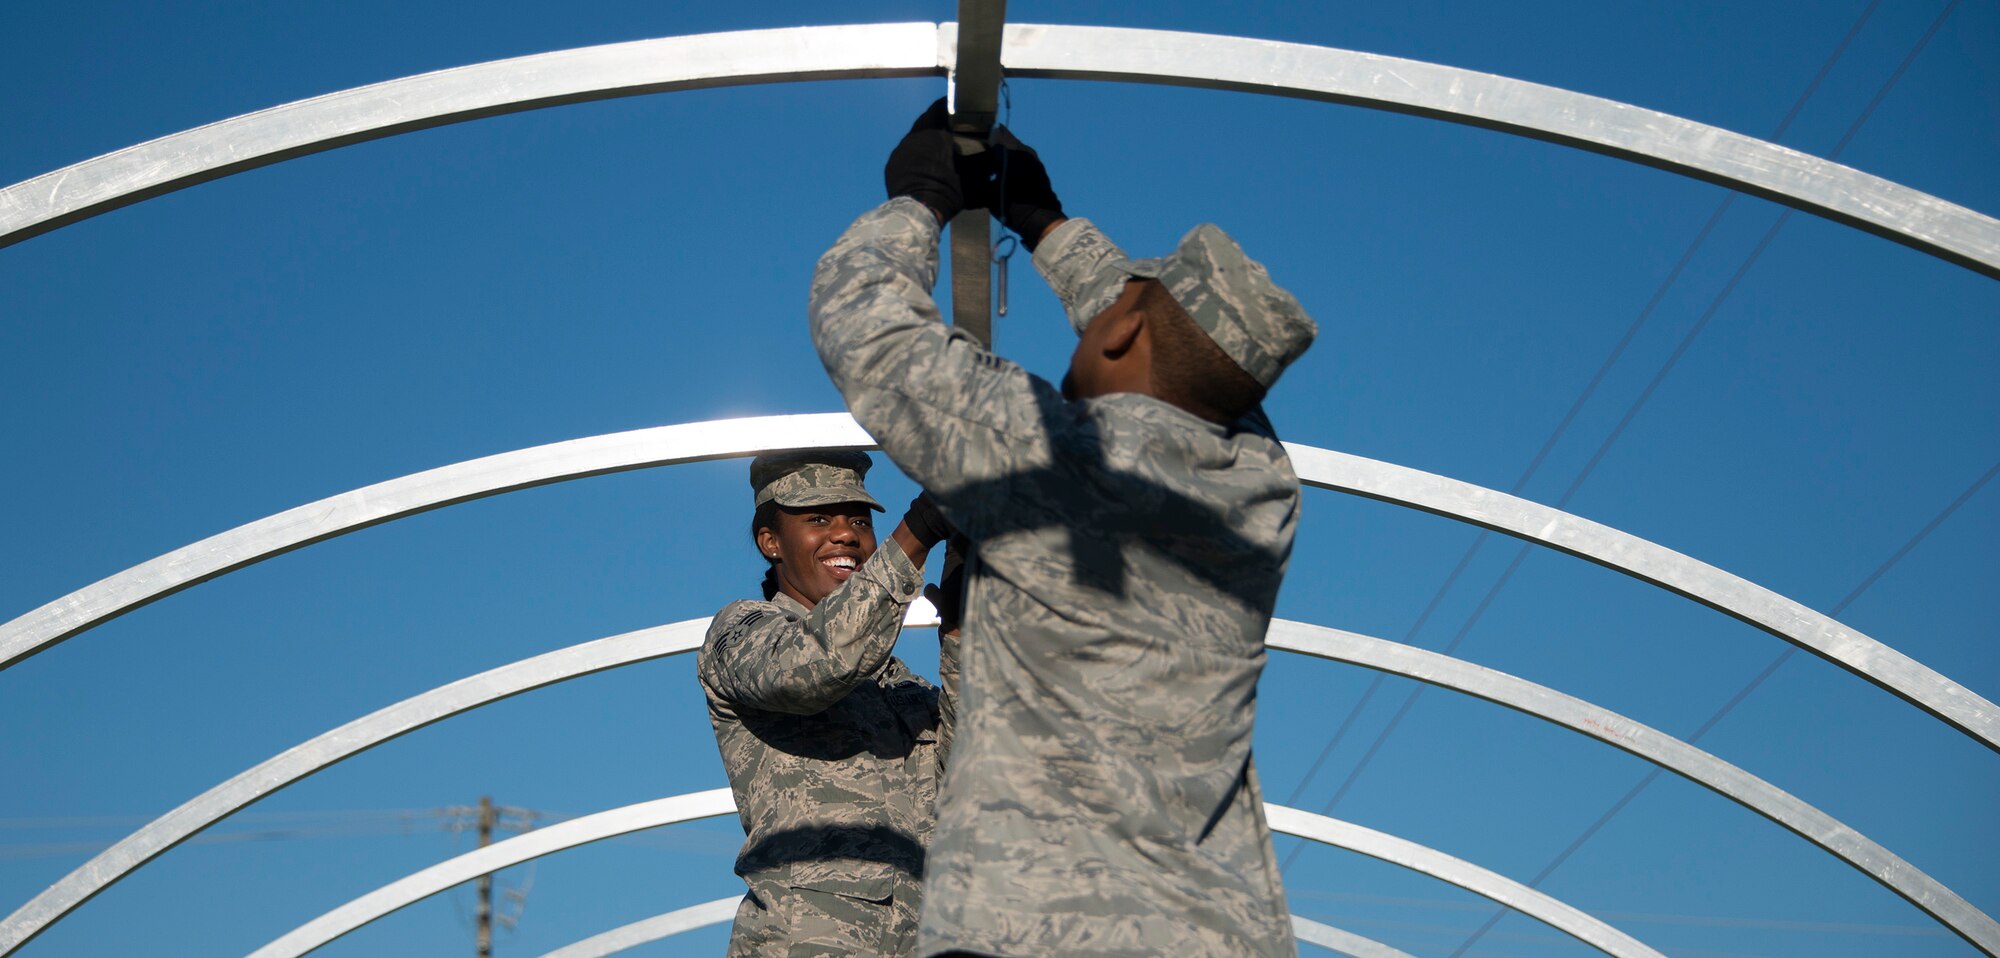 Senior Airman Charelle Baxter, 919th Special Operations Force Support Squadron, lifts a beam into place during small shelter system training at Duke Field, Fla., Sept. 13. The shelter takes six fully trained personnel approximately three and a half hours to complete. The SSS training is part of annual home station readiness training for all members of the squadron. (U.S. Air Force photo/ Tech. Sgt. Jasmin Taylor)  